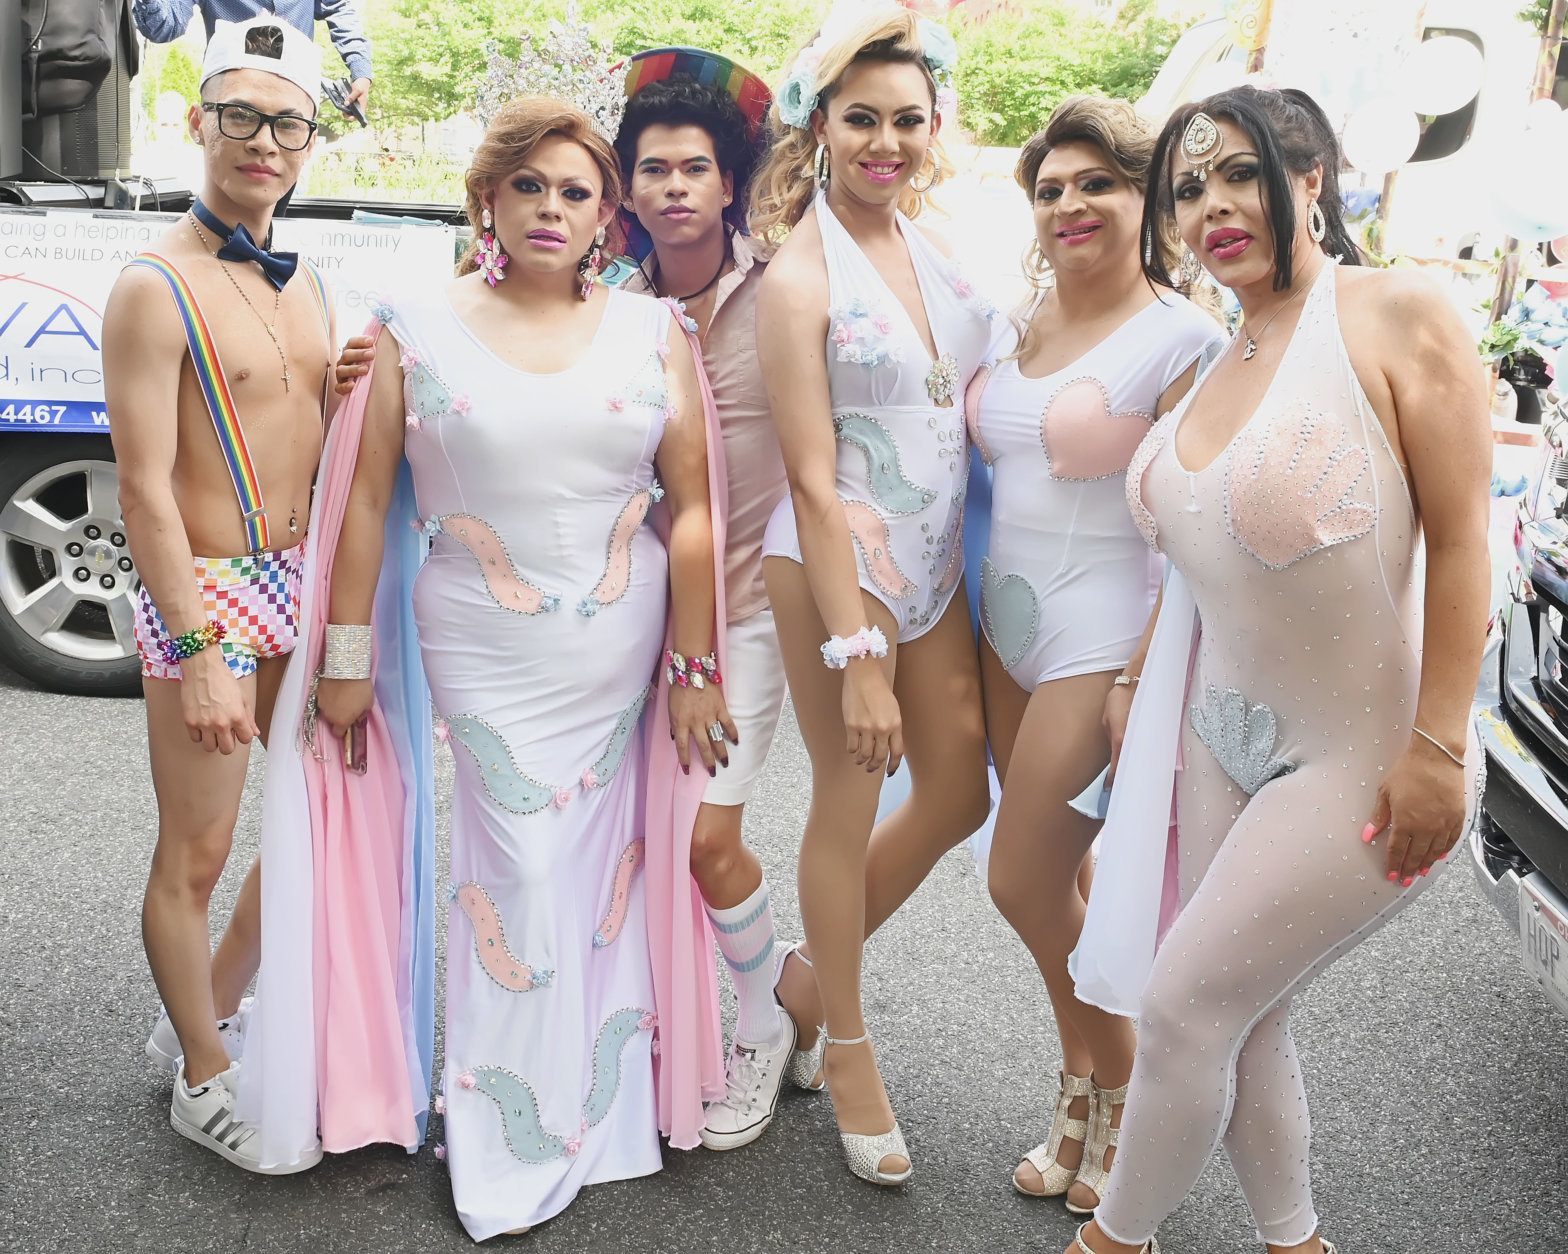 A group of friends get ready to board their float at the 2019 Capital Pride Parade. (Shannon Finney Photography)